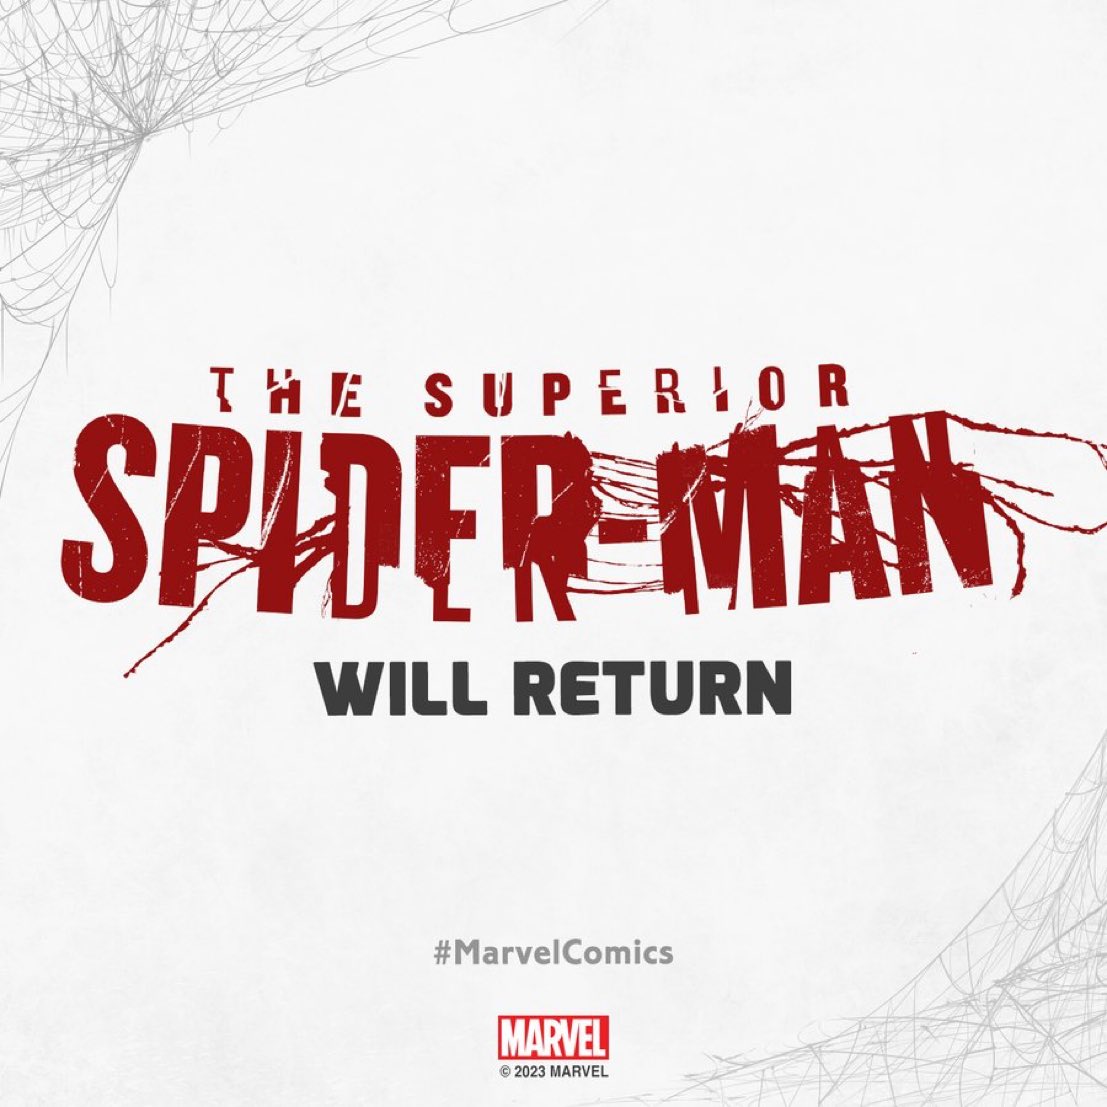 RT @SpiderMan3news: A new ‘SUPERIOR SPIDER-MAN’ comic series is coming https://t.co/3CTJbOdfvq